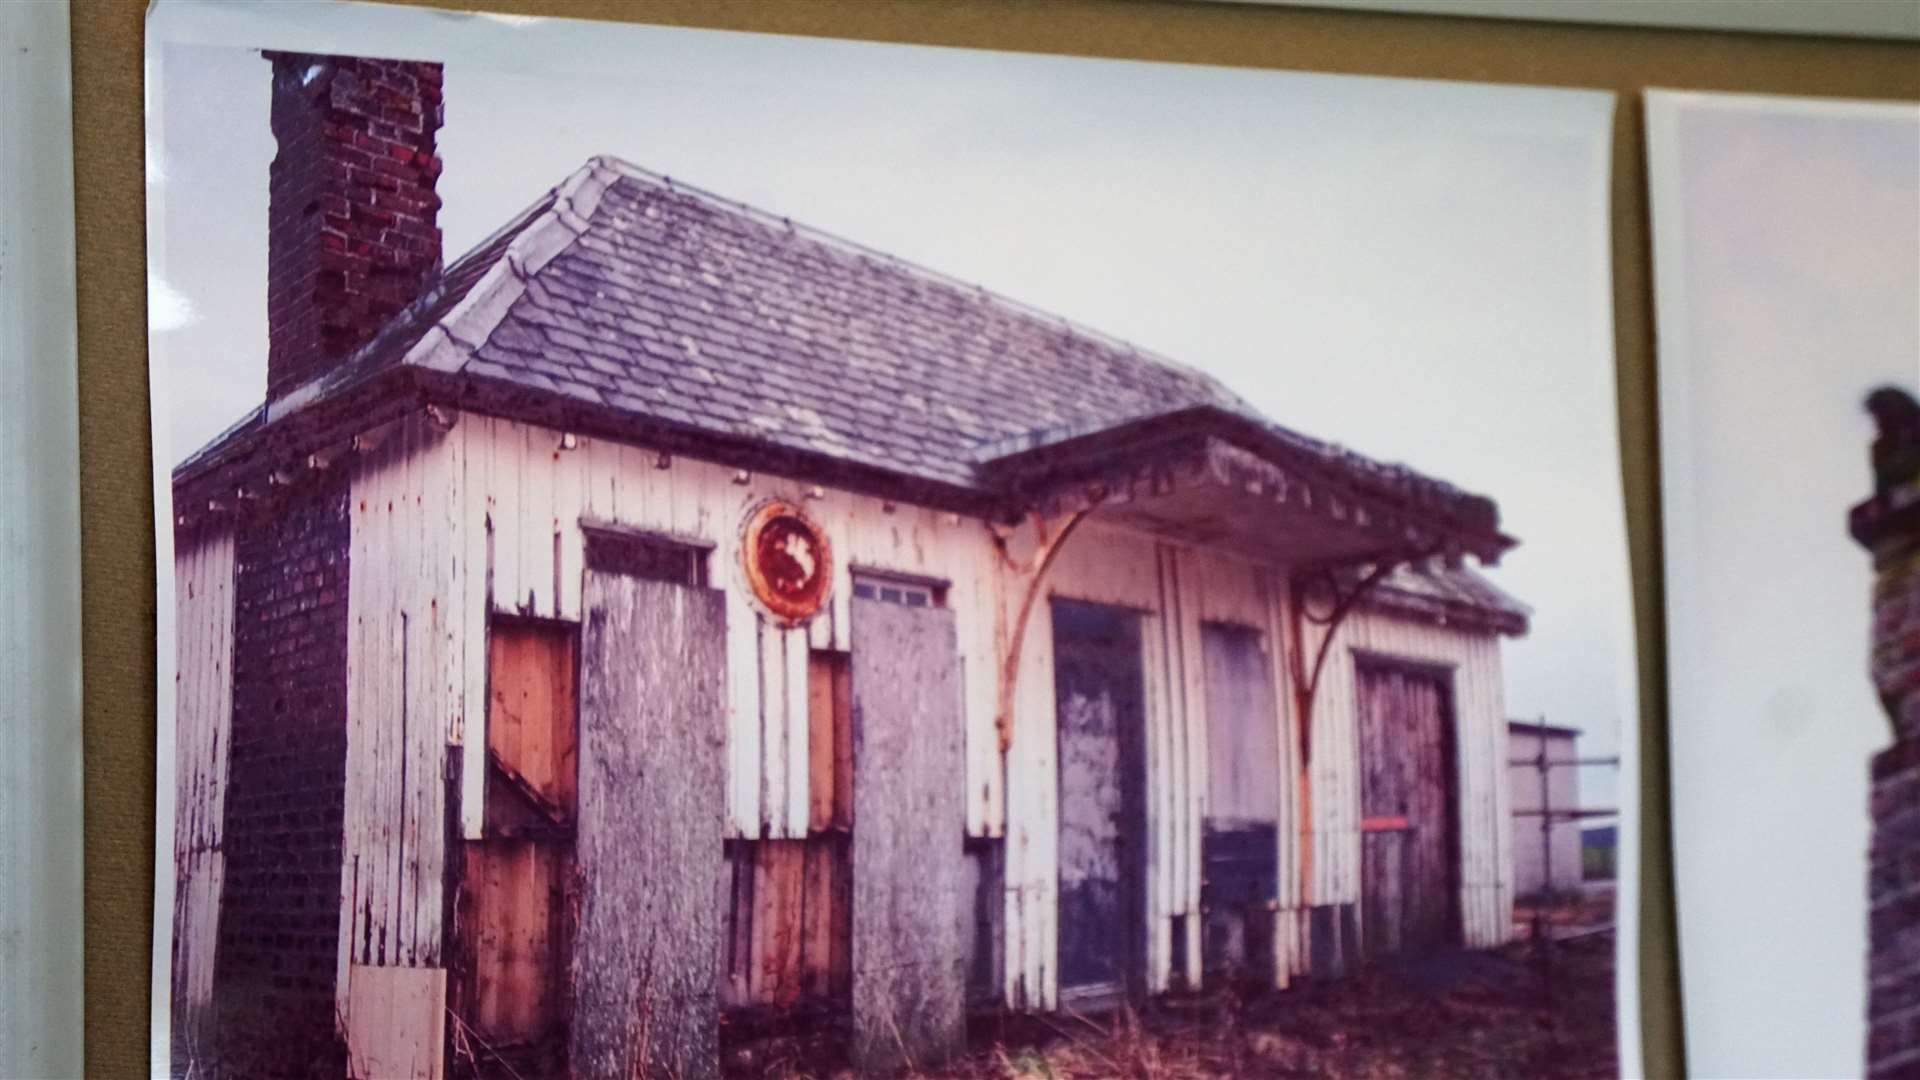 An old photograph of how the building looked like before renovation work.